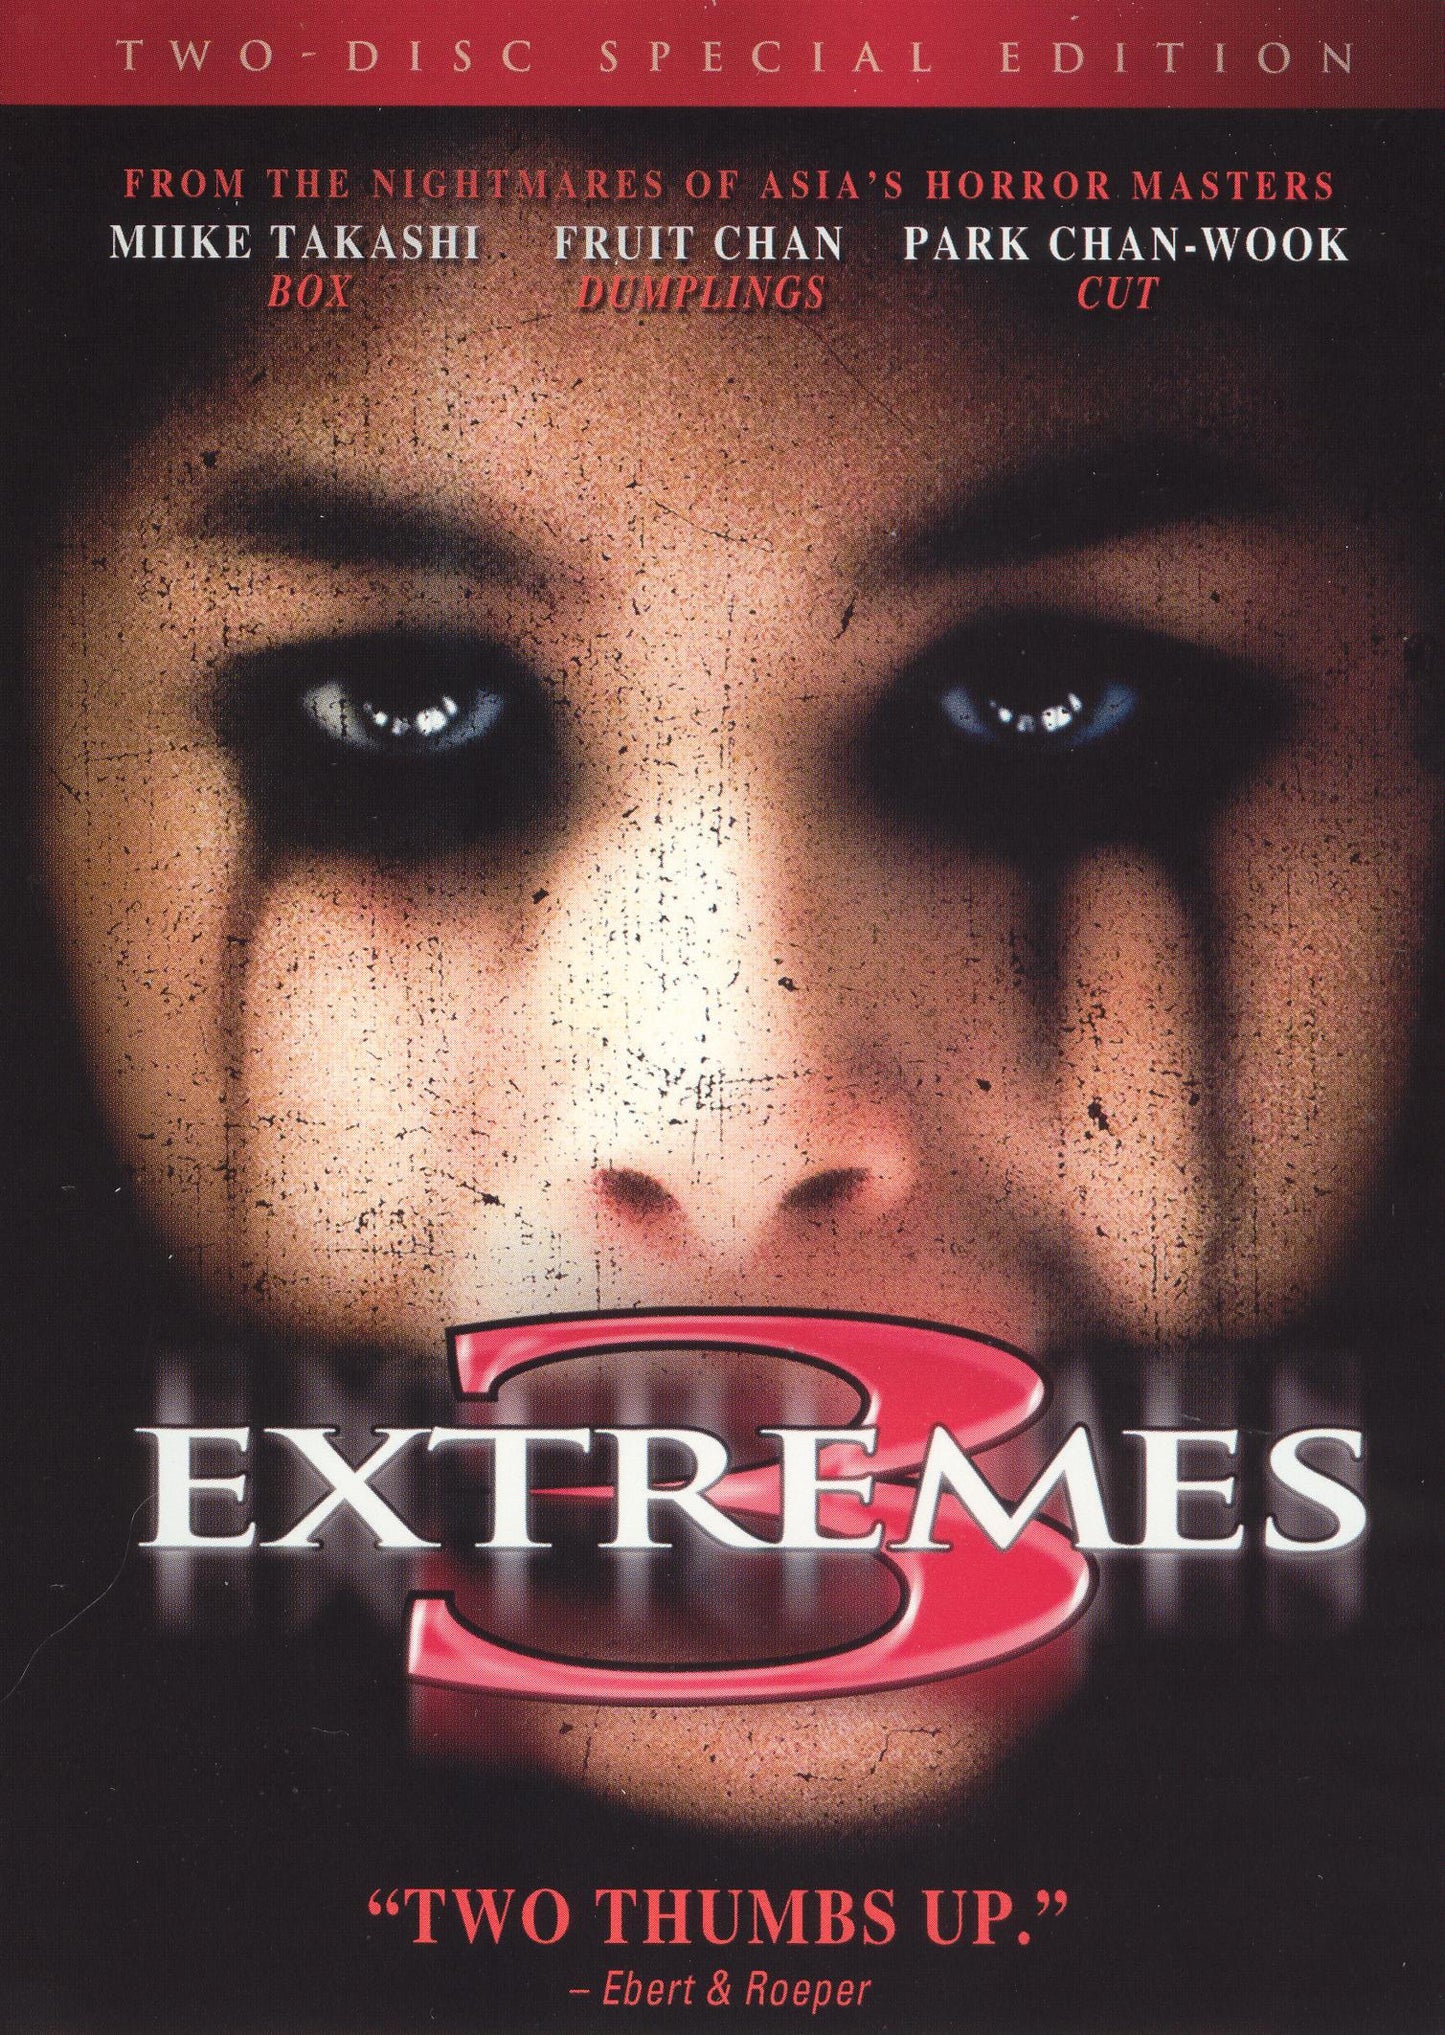 3 Extremes cover art